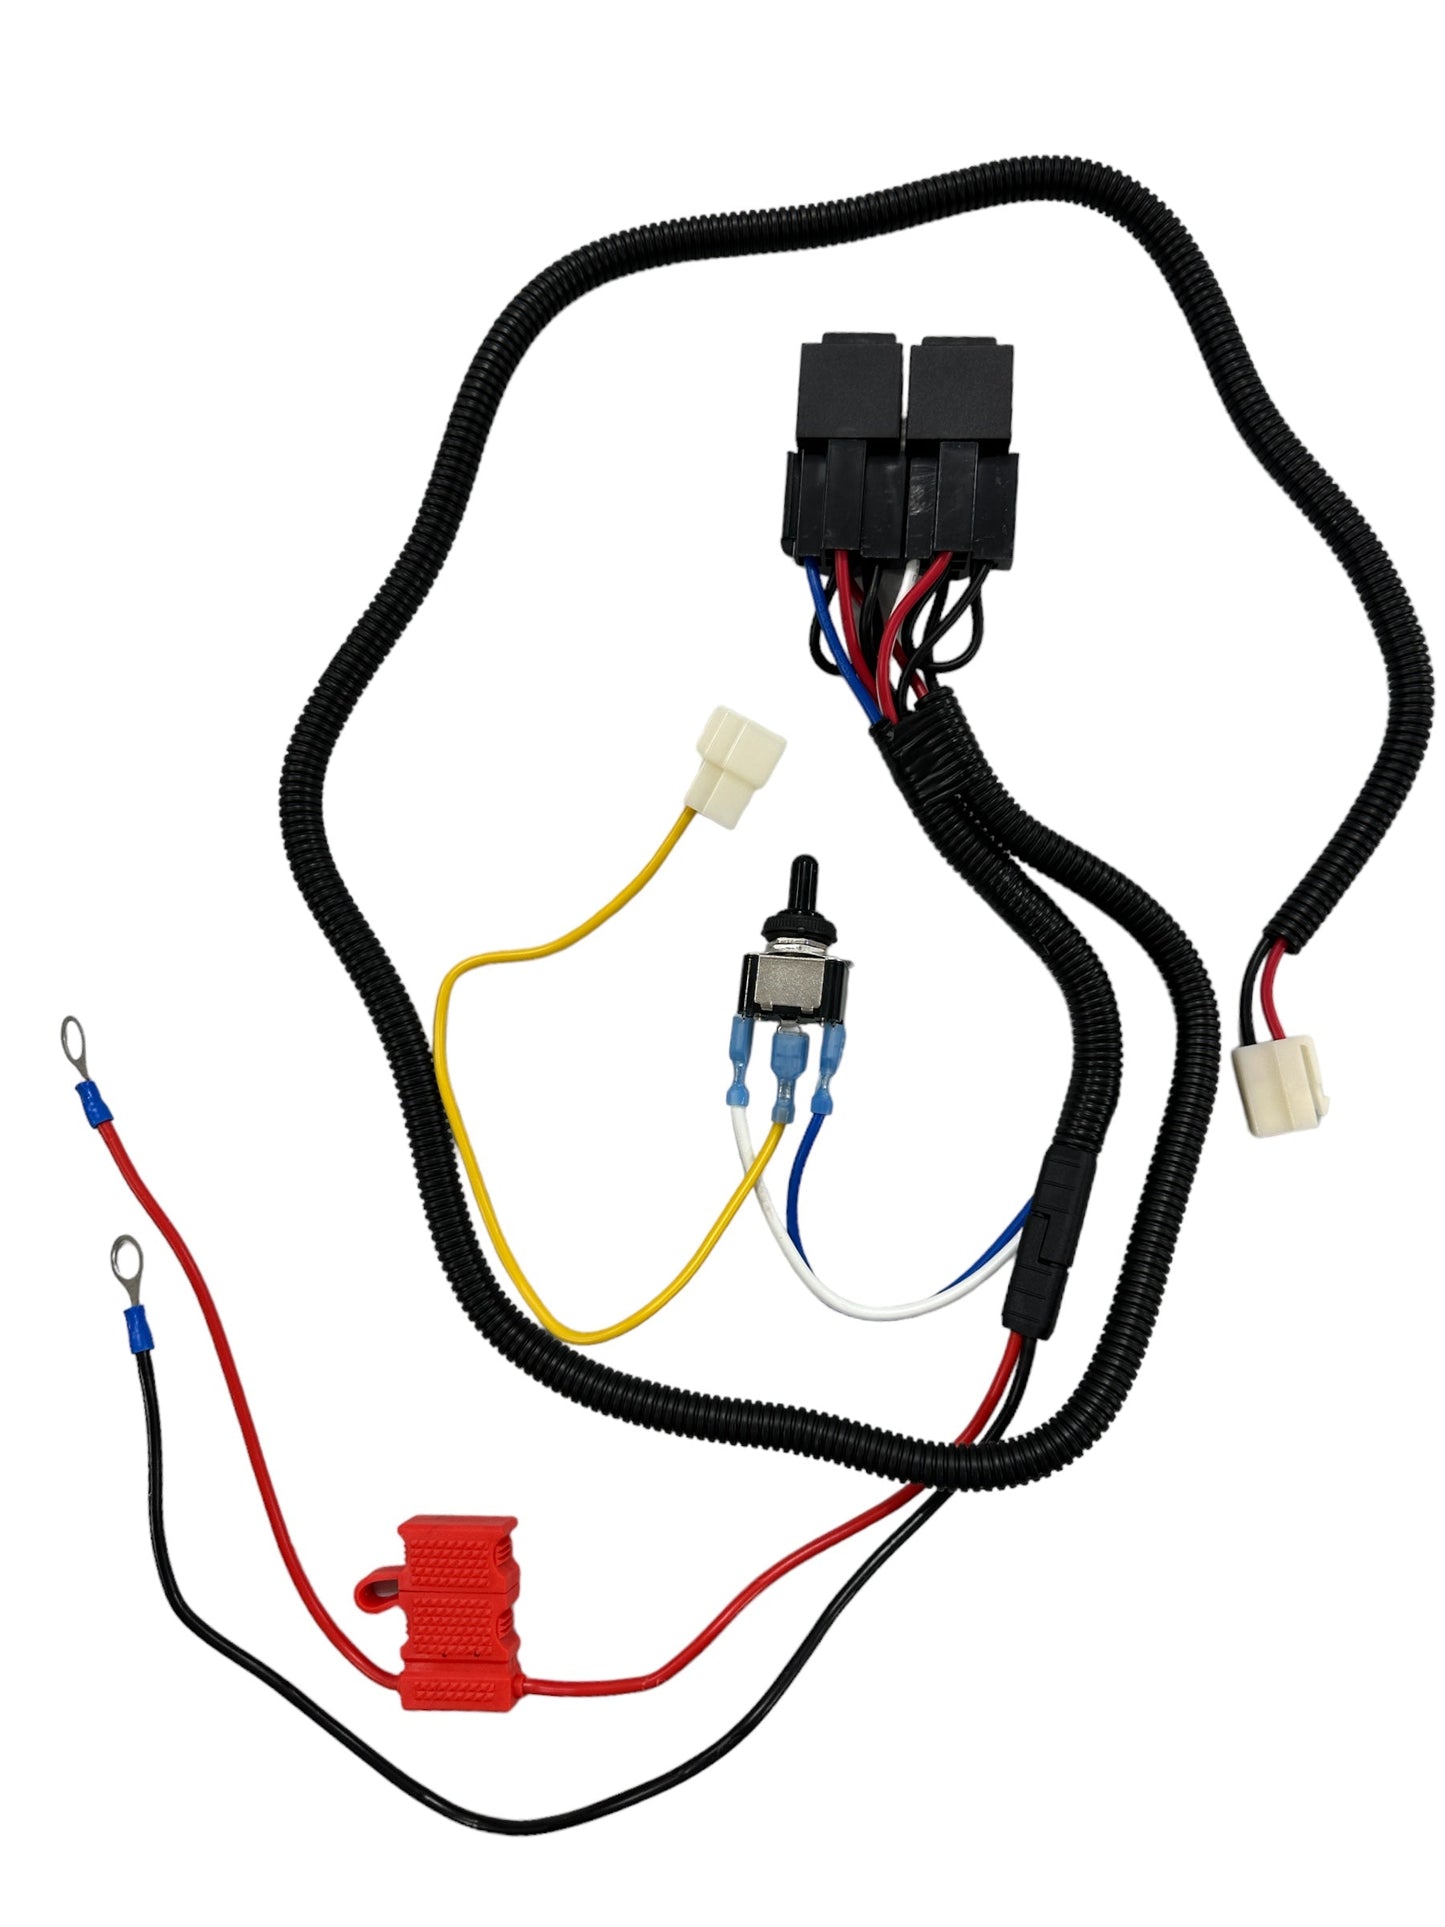 Electric Lift Kit for John Deere Use with 100/s240 Series Tractor for 700AM Snow Blower (Replaces OEM LP68150)